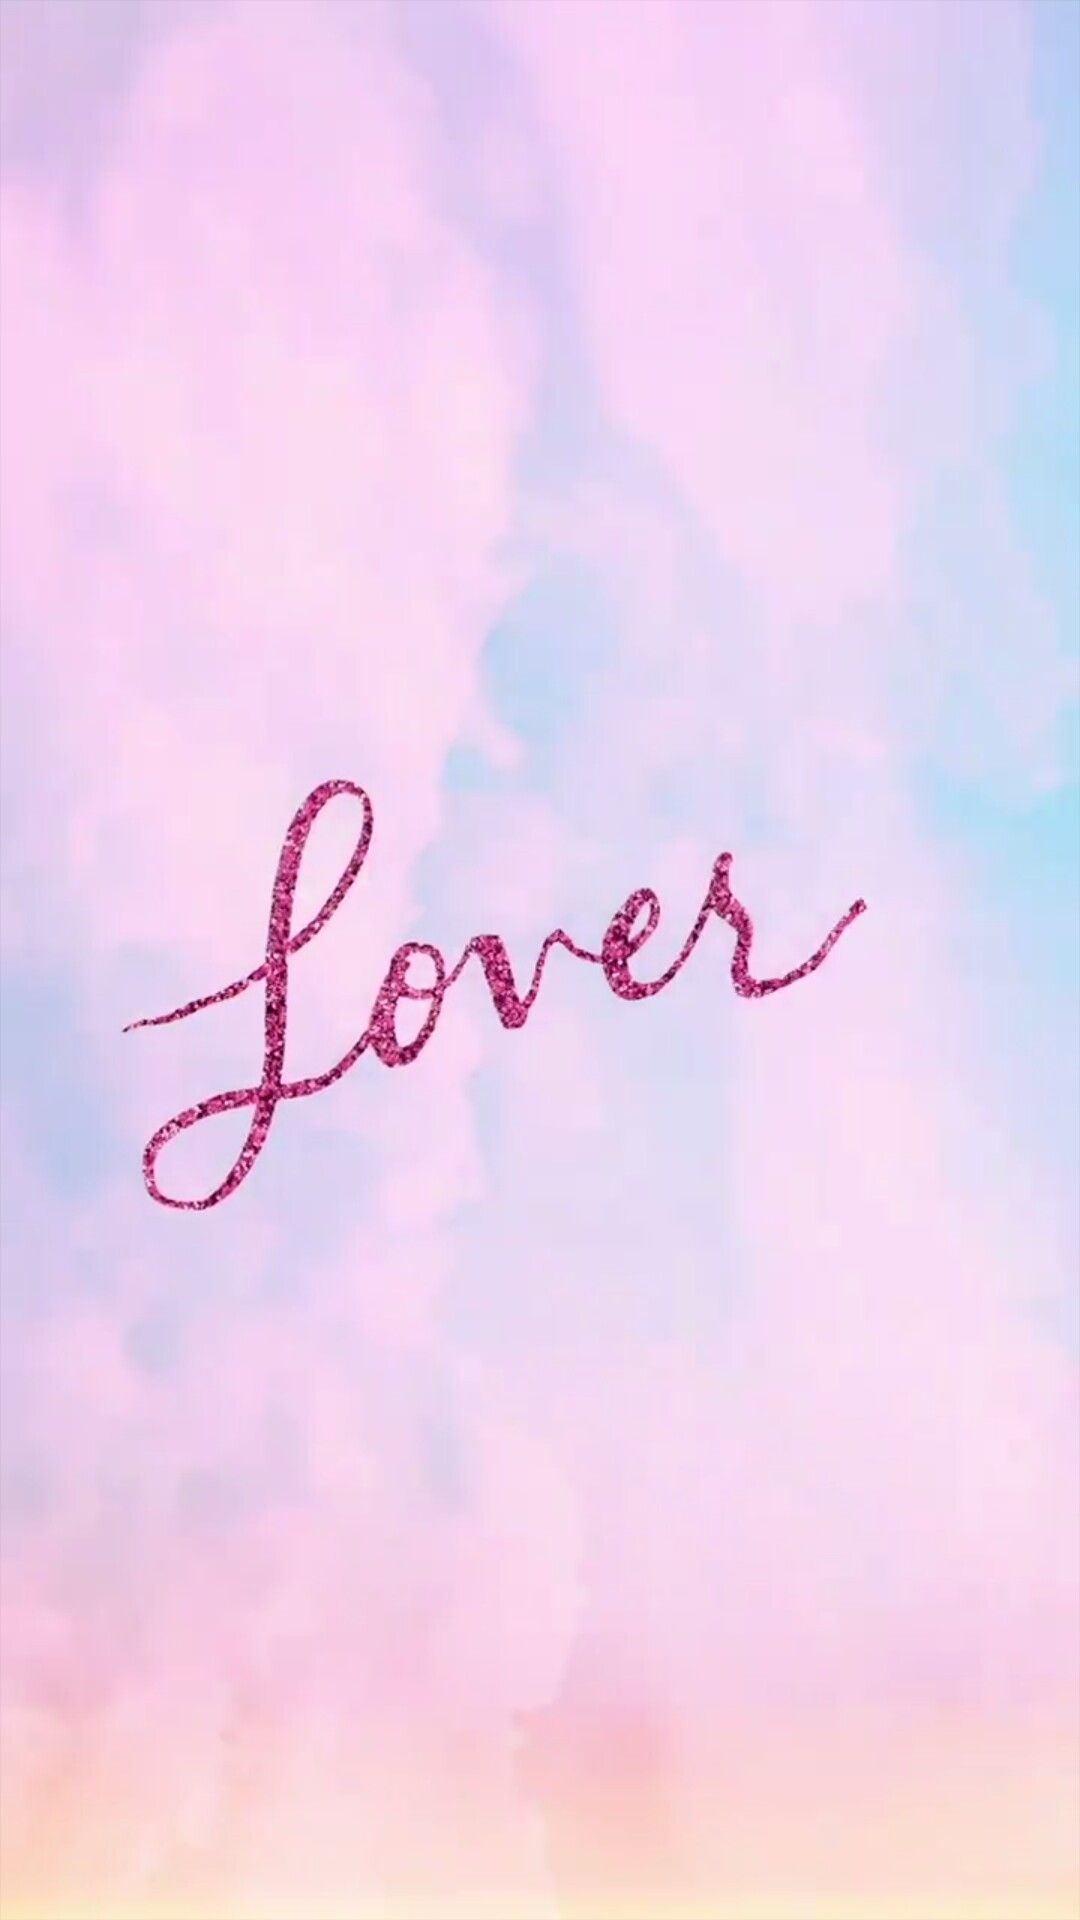 The word lover is written in pink letters against a blue sky - Taylor Swift